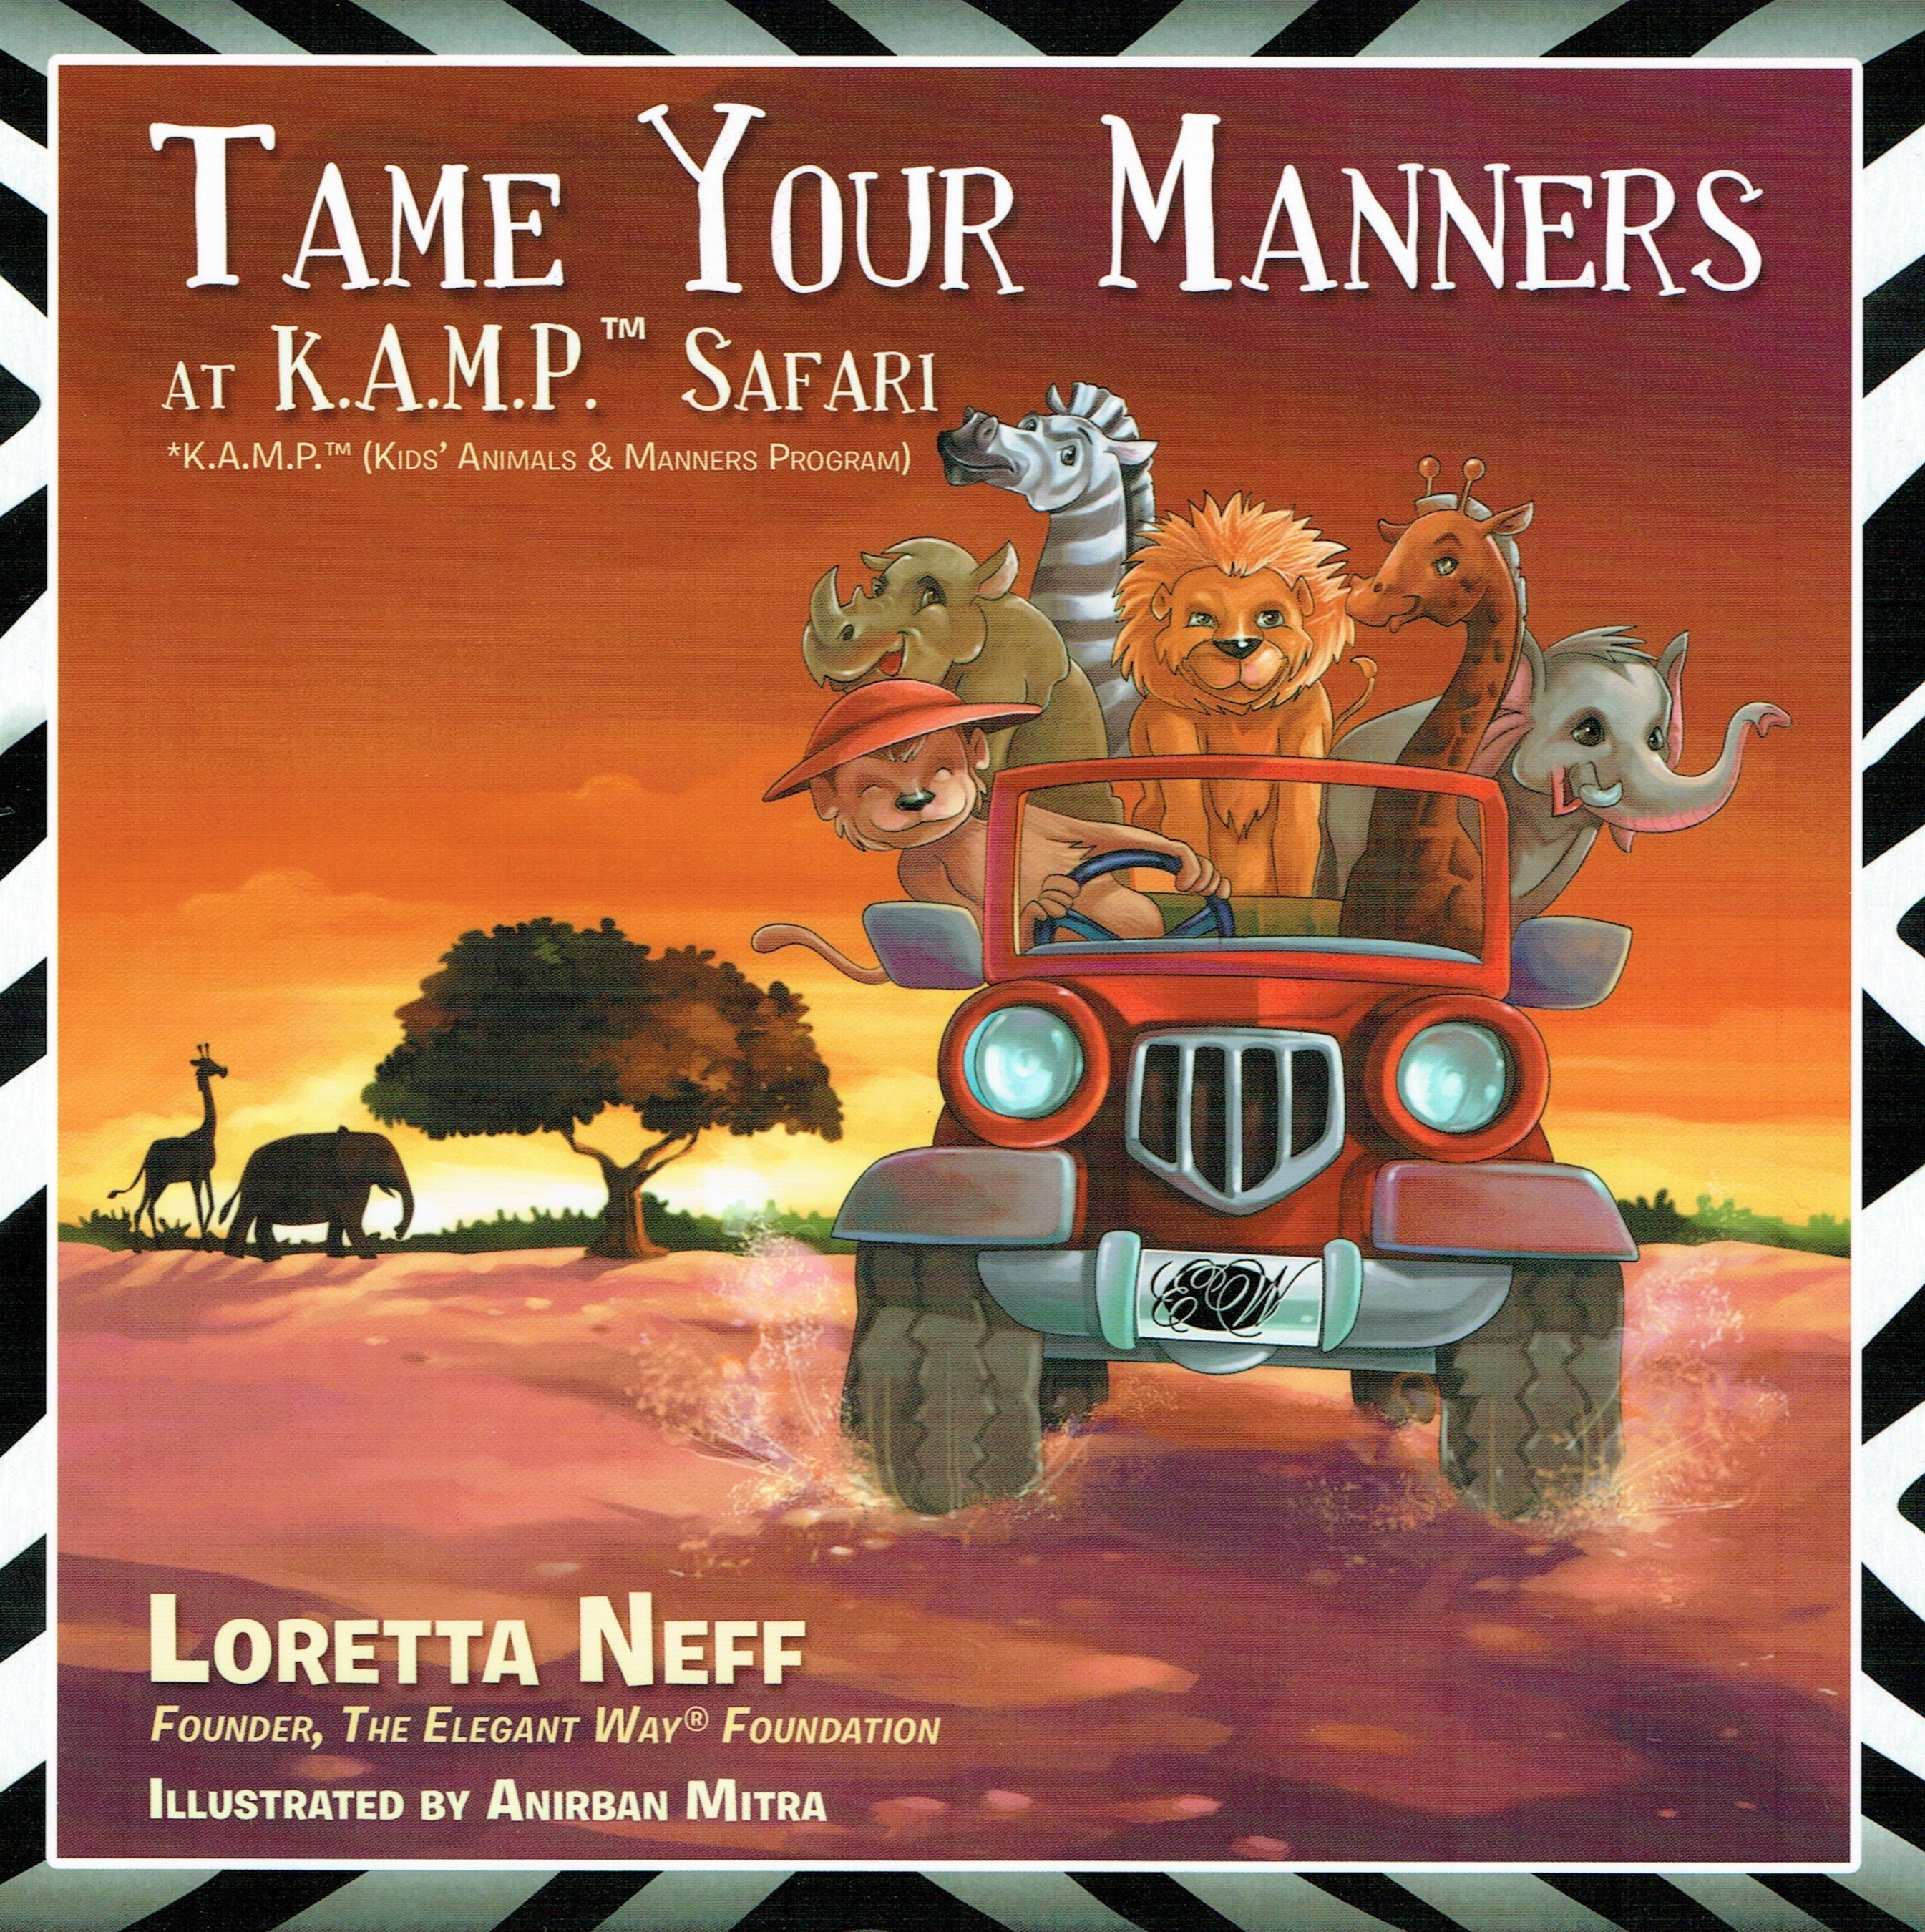 Tame Your Manners at K.A.M.P. Safari Book Cover (PRNewsFoto/The Elegant Way Foundation)